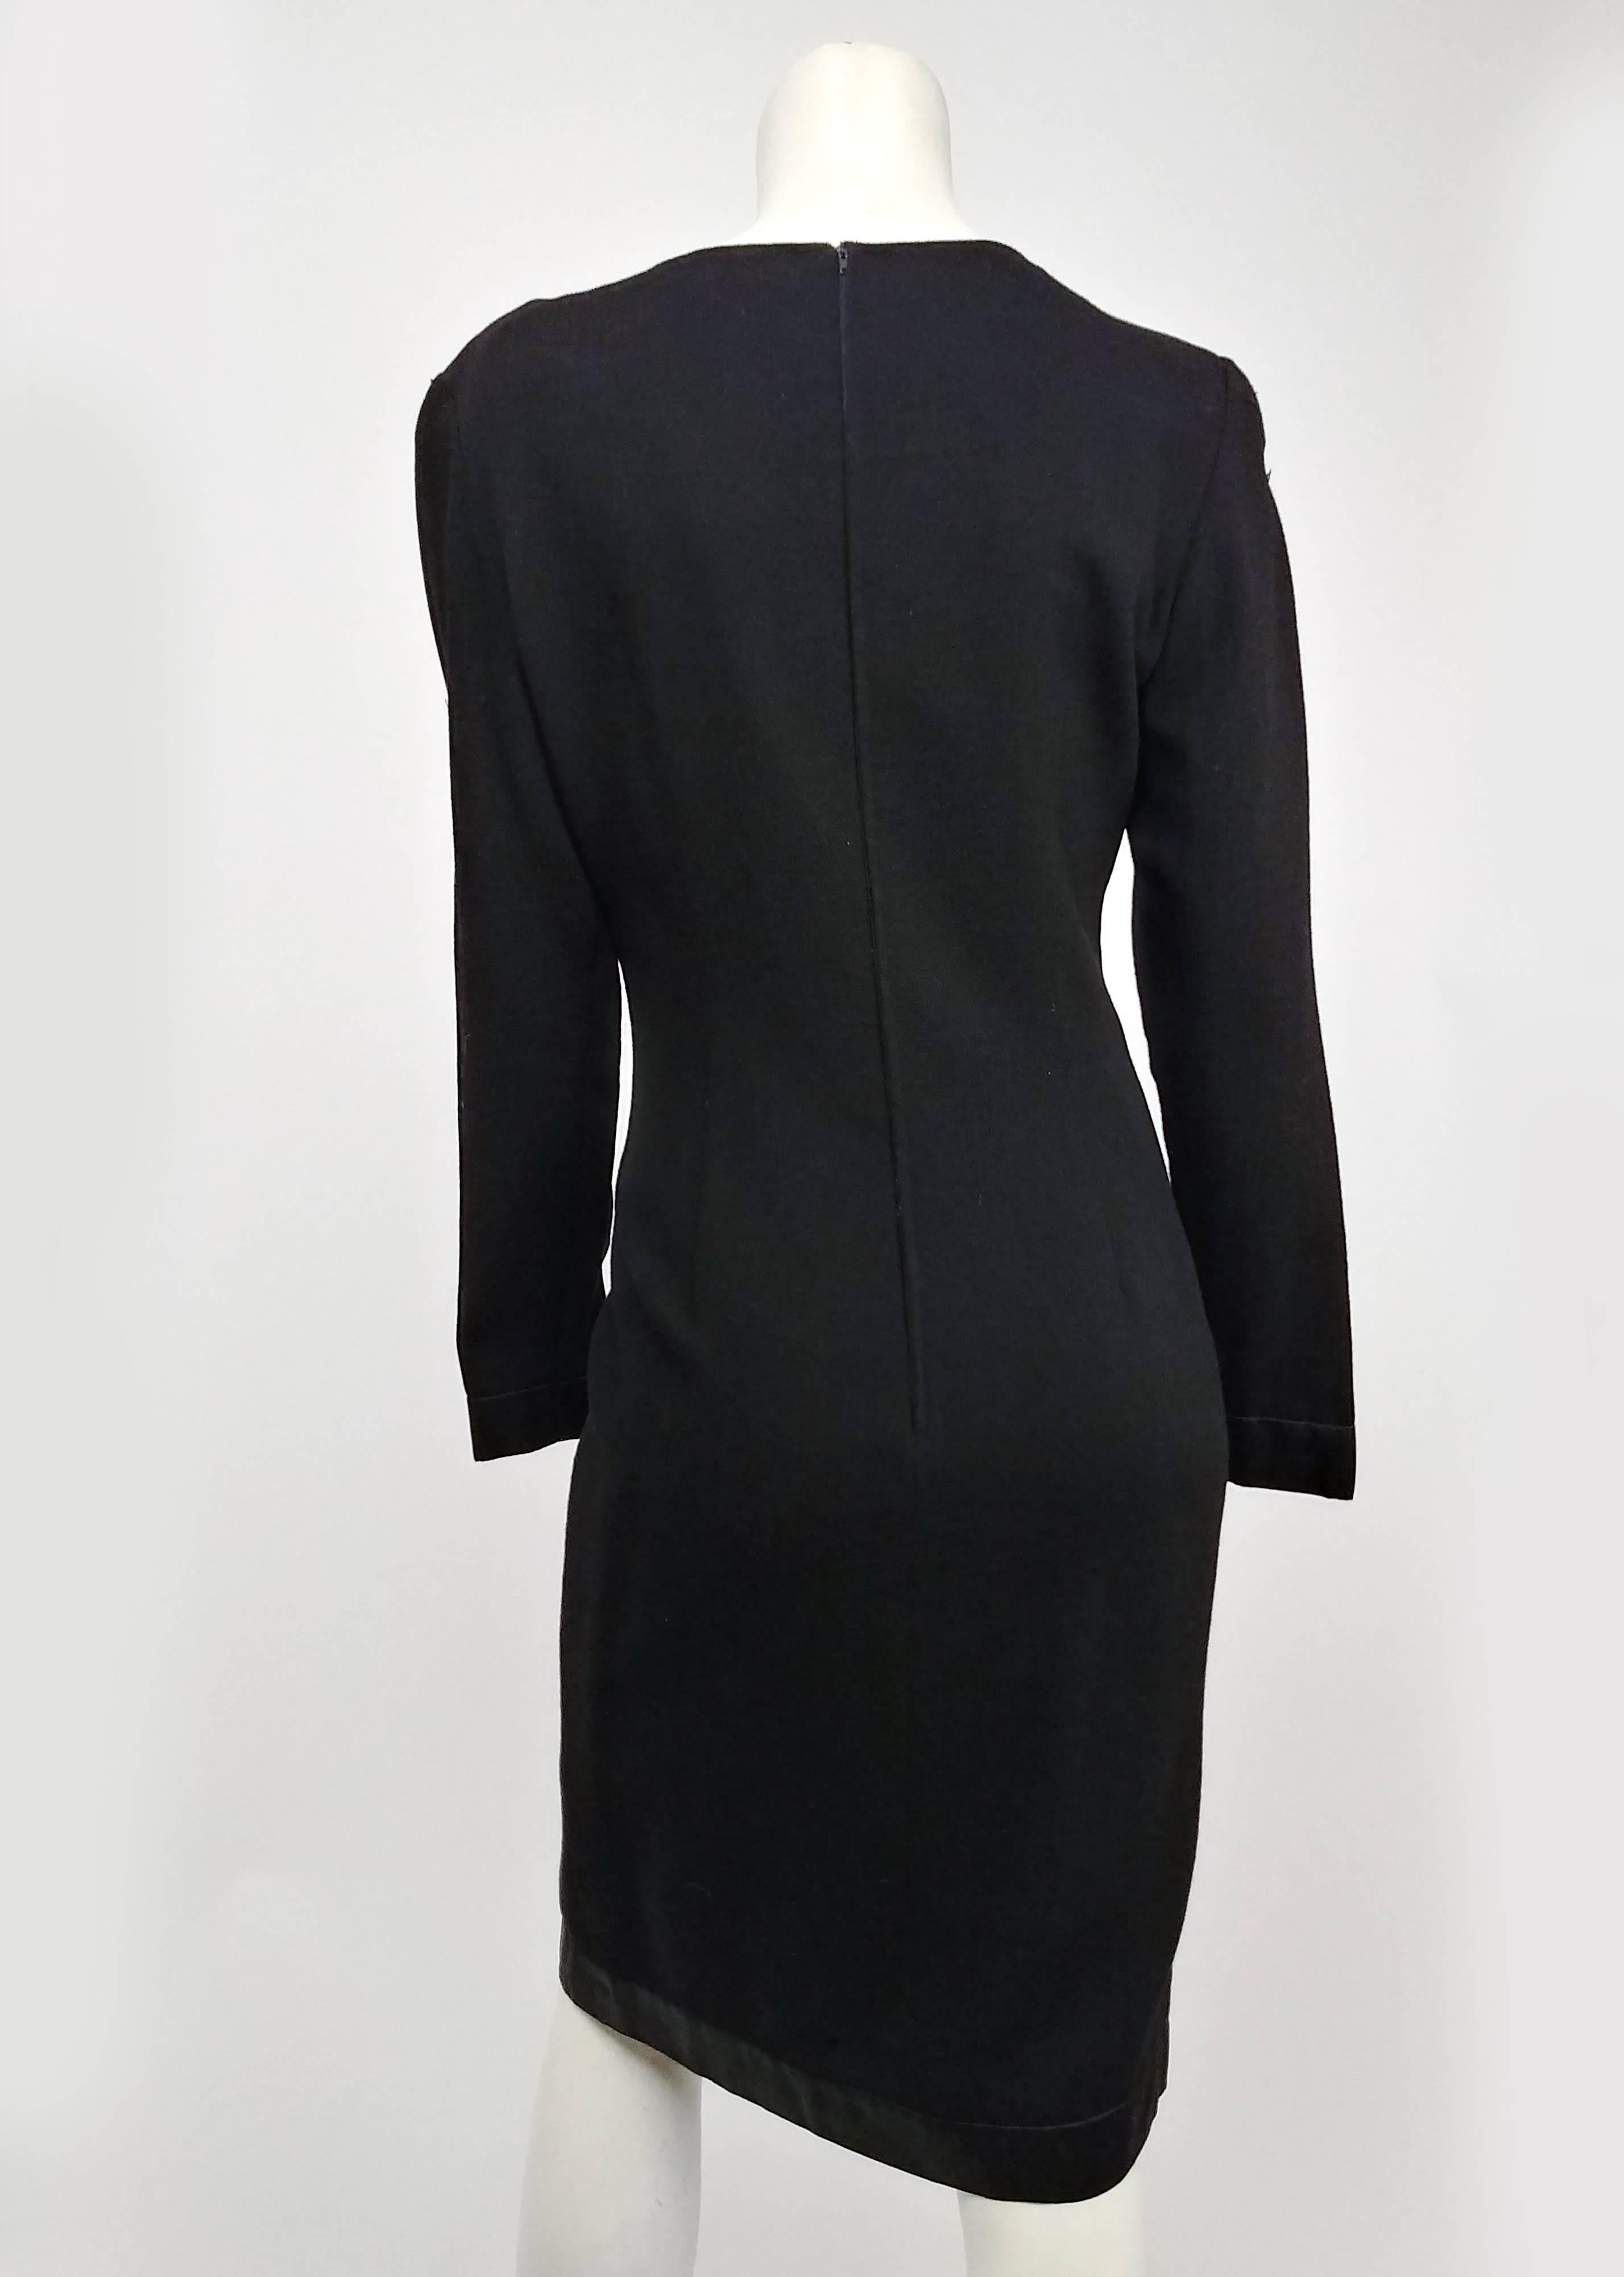 Valentino Missy Black Cocktail Dress with Satin Trim, 1980s  In Excellent Condition For Sale In San Francisco, CA